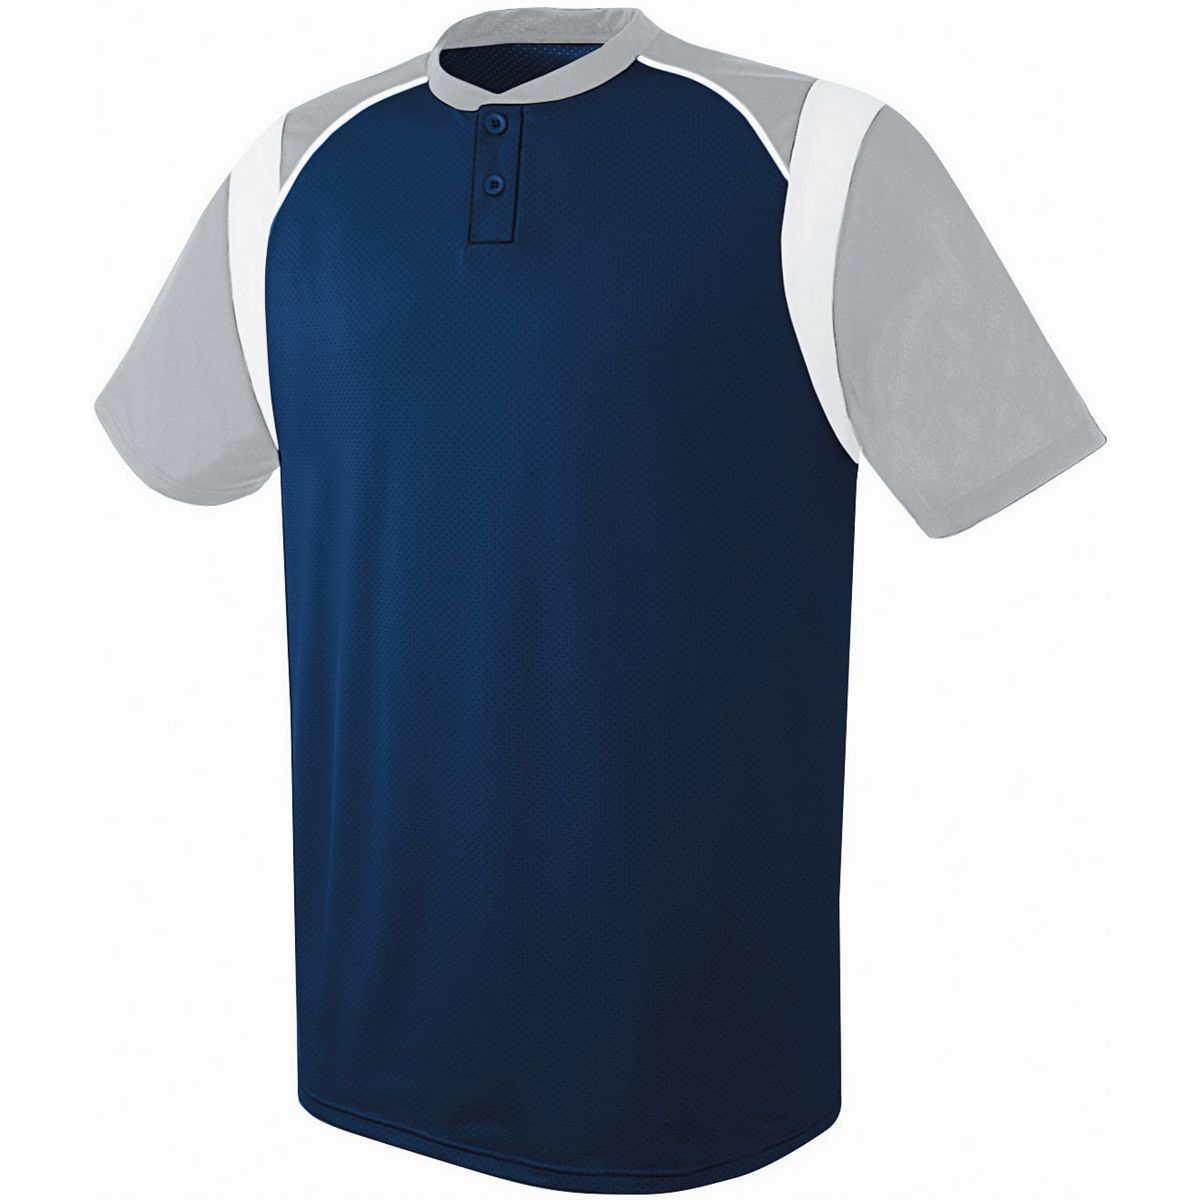 Augusta Sportswear Youth Wildcard Two-Button Jersey in Navy/Silver Grey/White  -Part of the Youth, Youth-Jersey, Augusta-Products, Baseball, Shirts, All-Sports, All-Sports-1 product lines at KanaleyCreations.com